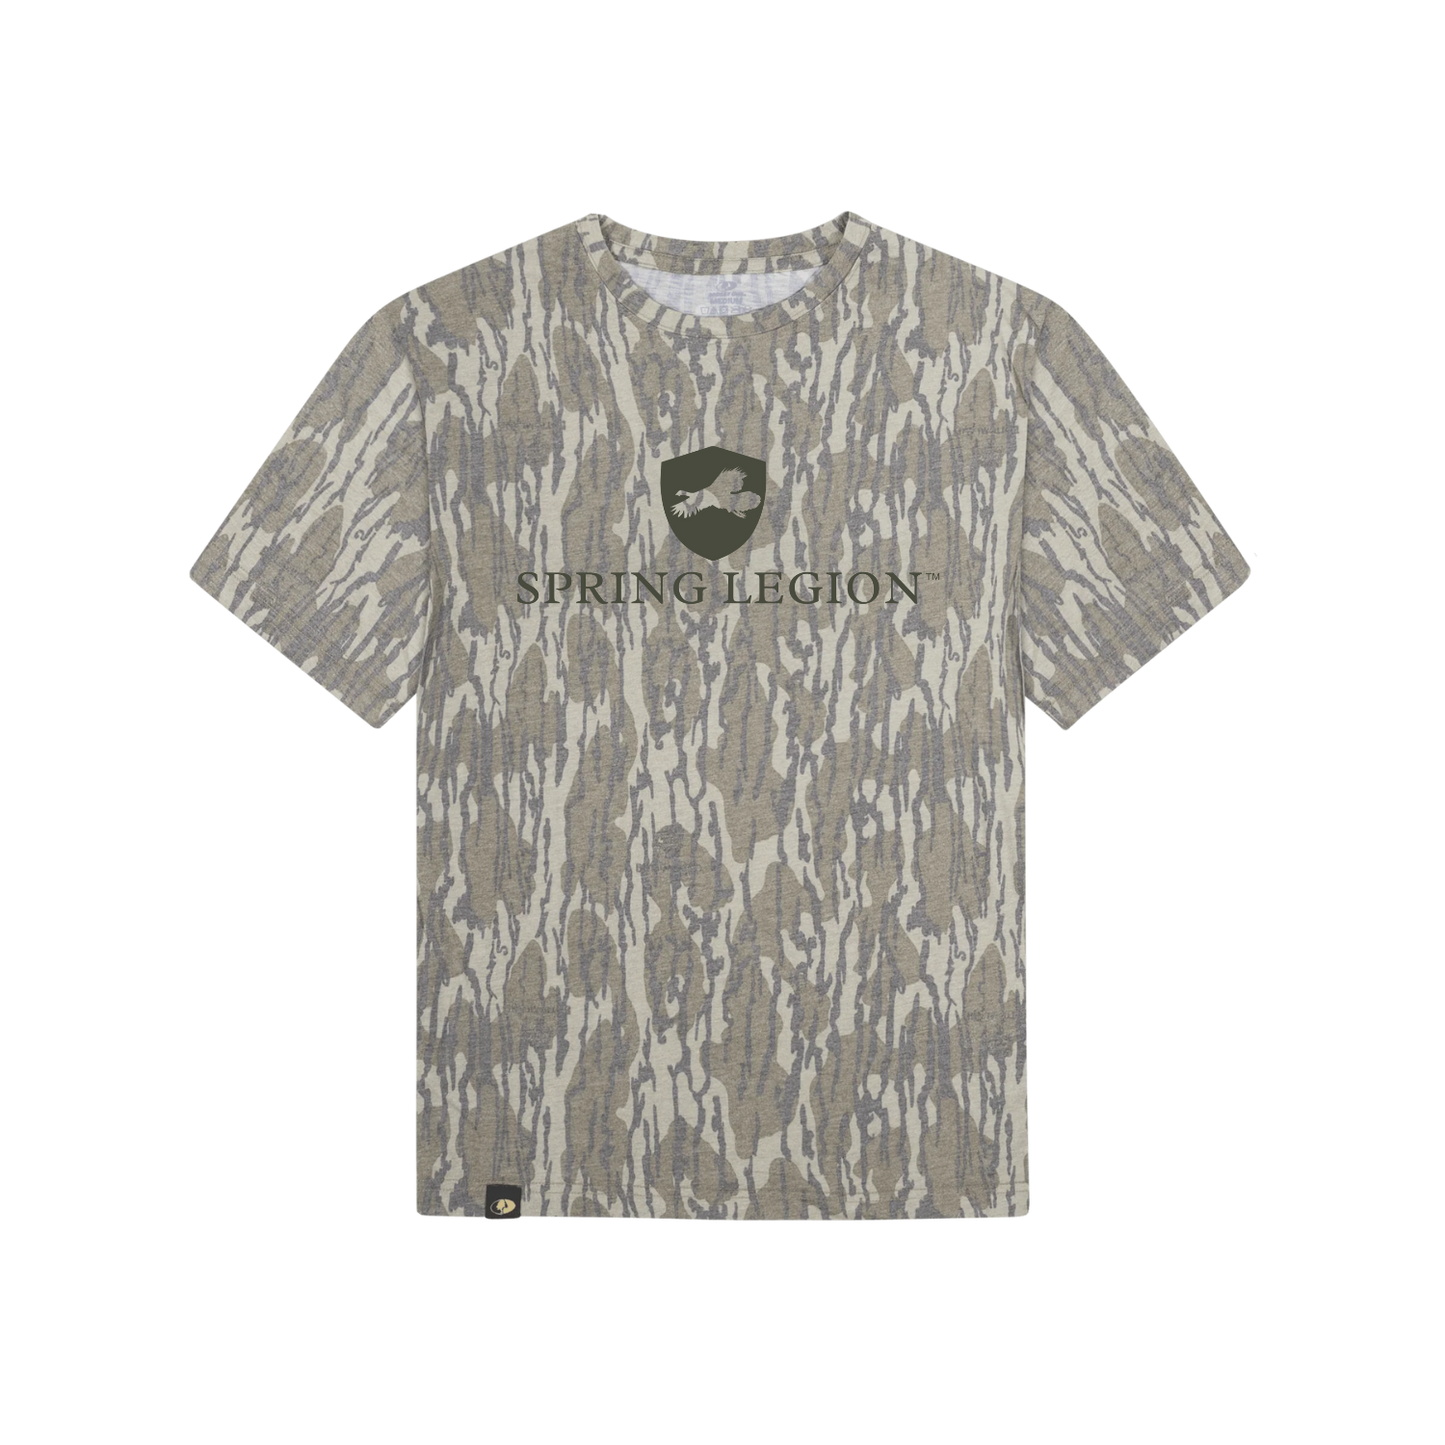 Faded, Vintage, Throwback, Old-school, mossy oak, bottomland, washout, tee, Greenleaf, shirt, heirloom, hunting, new, pinhoti, panola, shadow grass, cool hunting, the best, most comfortable, lightest, casual, retro